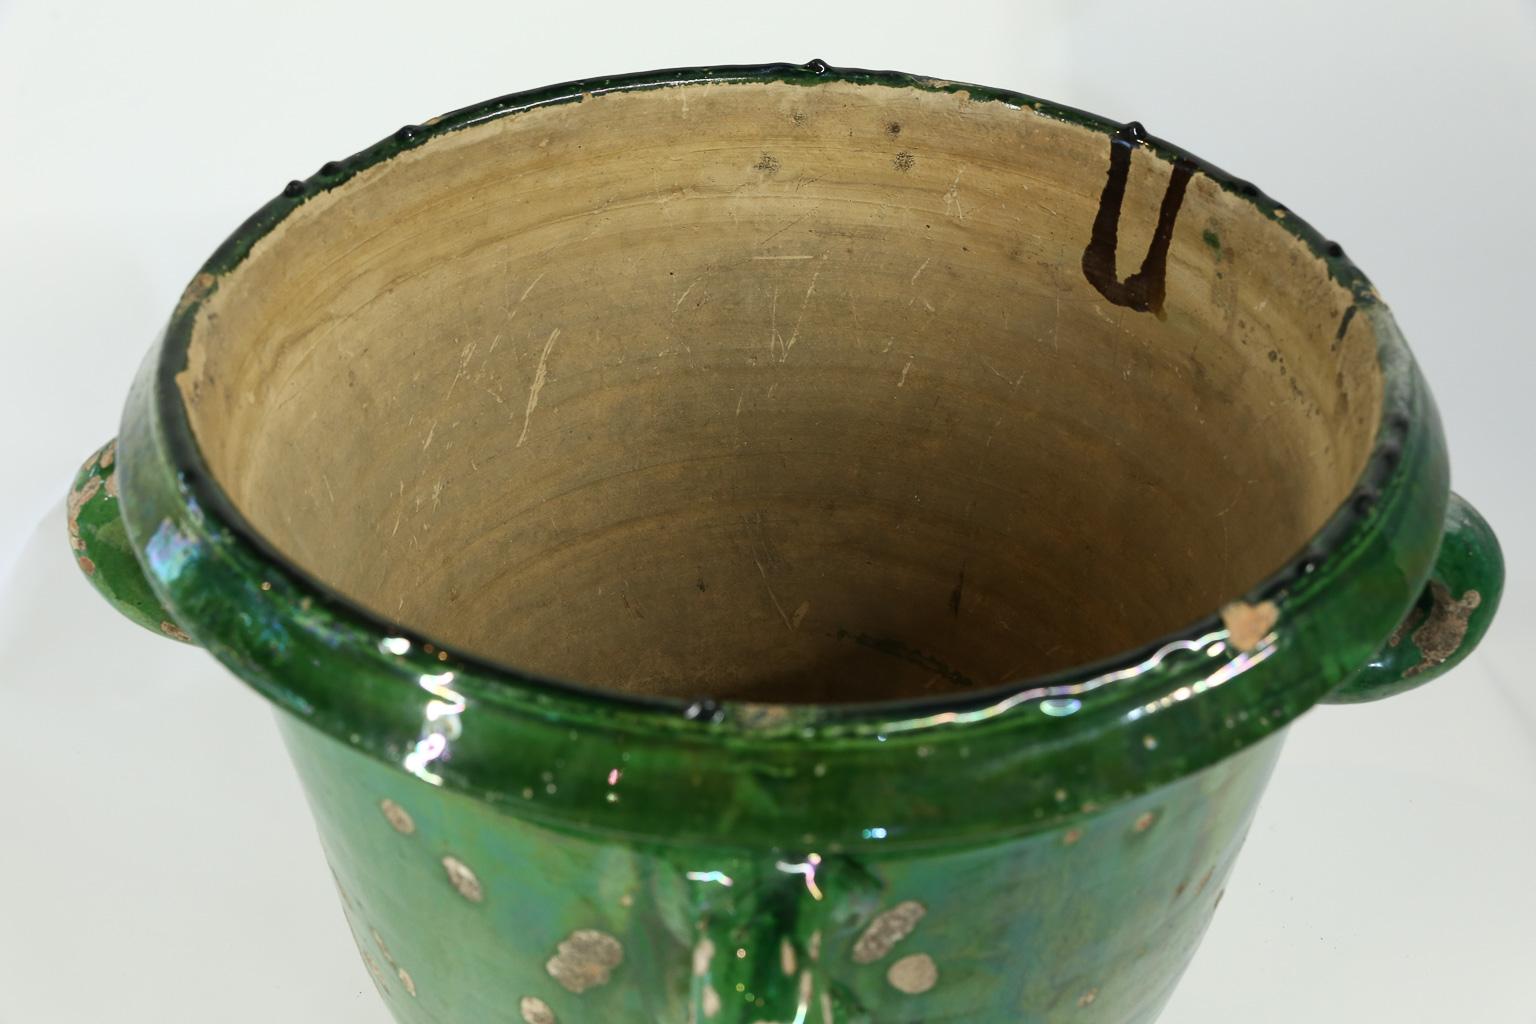 French Glazed Terracotta Planter from Anduze, France